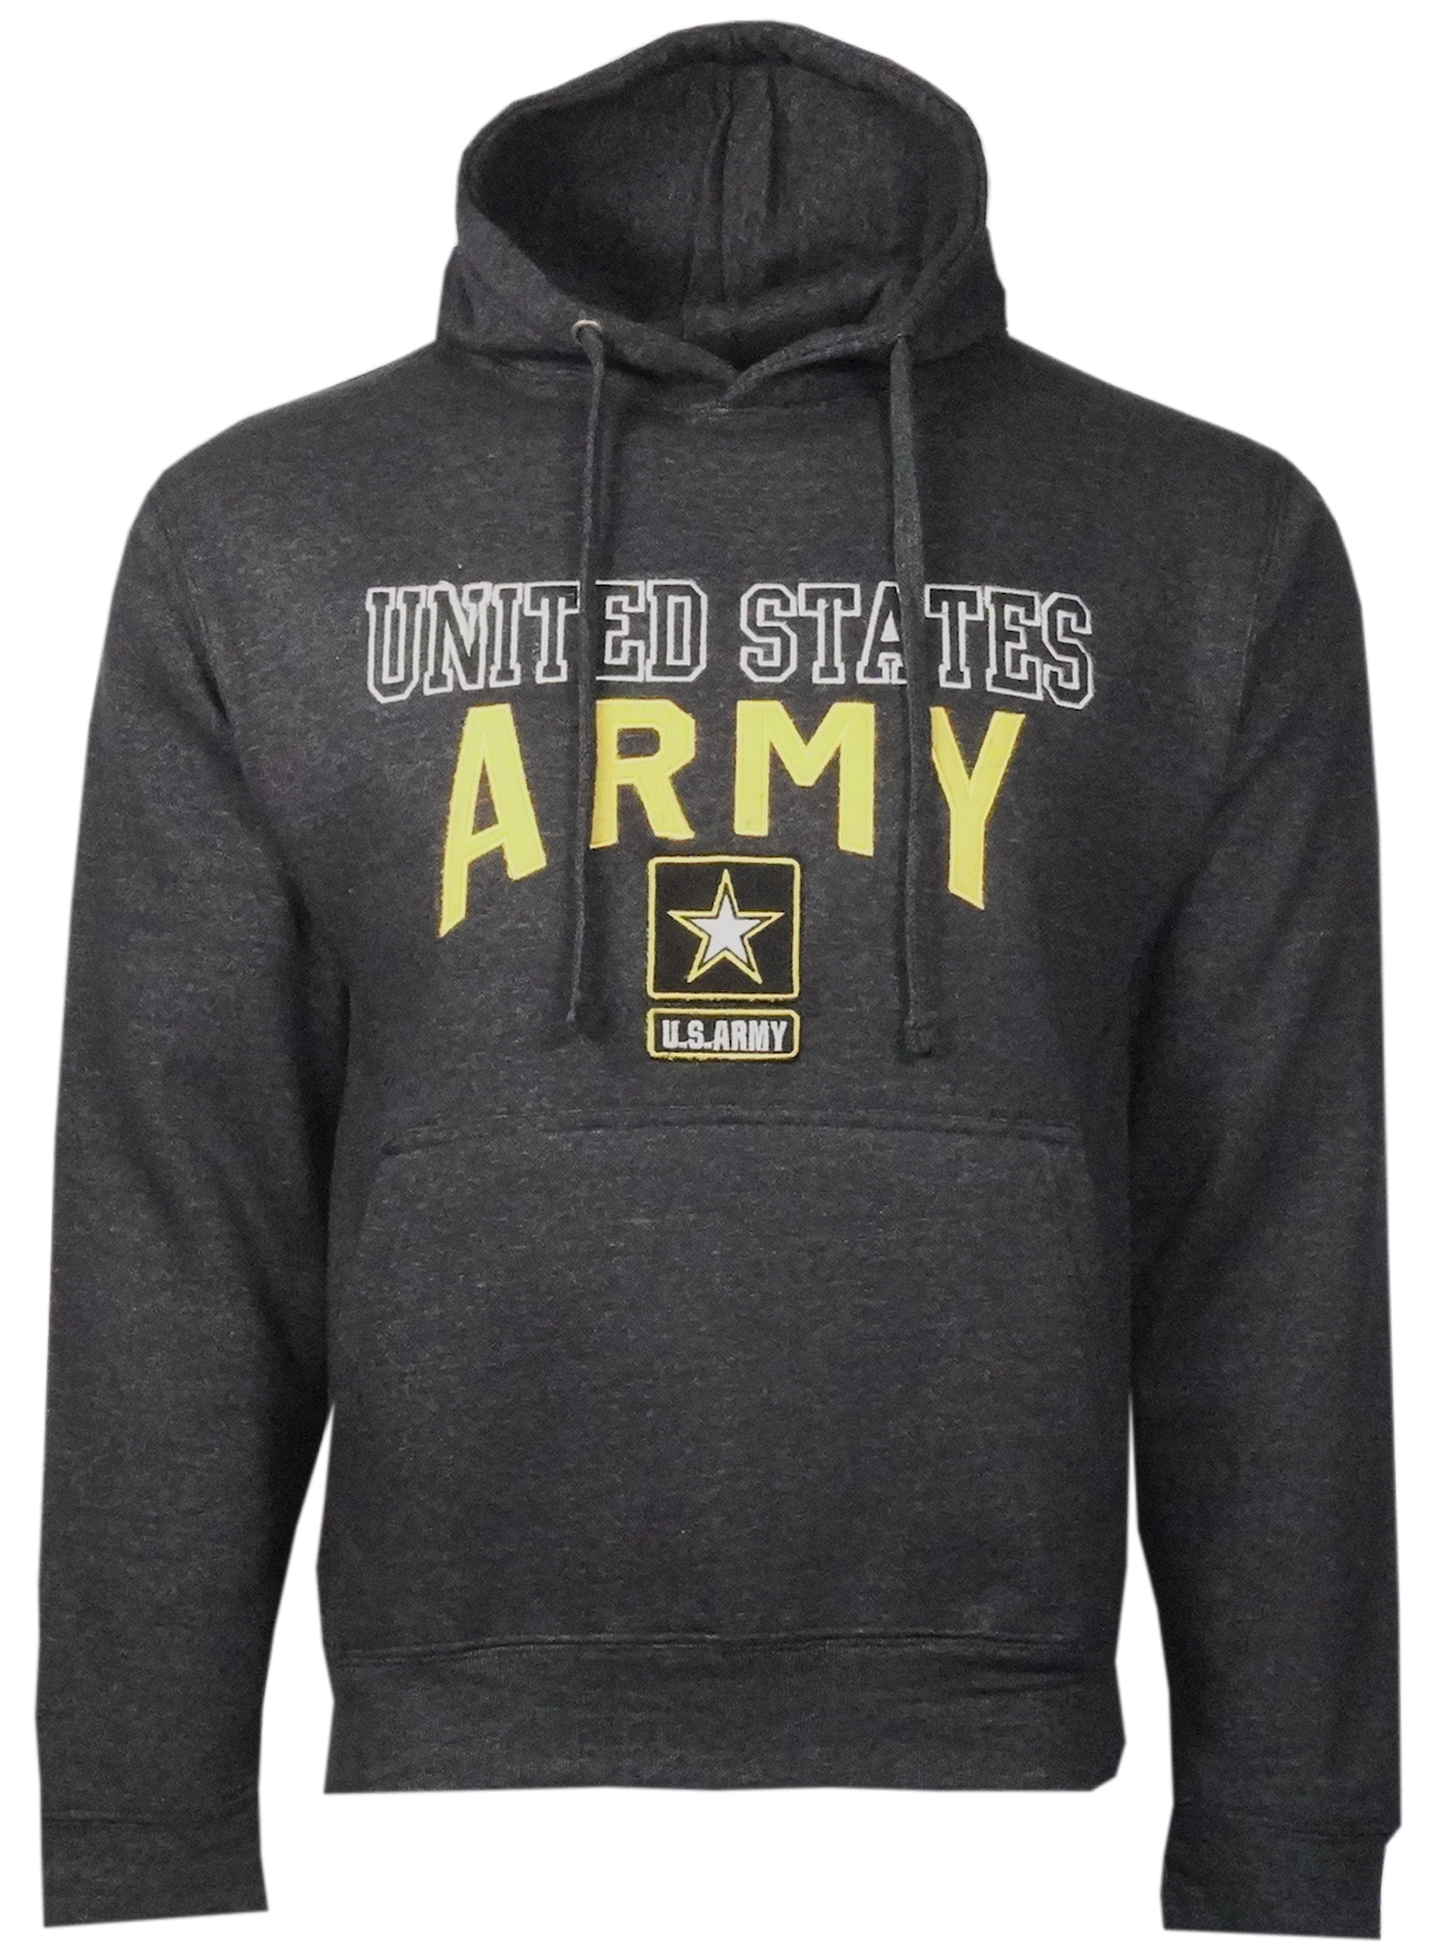 United States Army Star Fleece Tight Knit Pullover